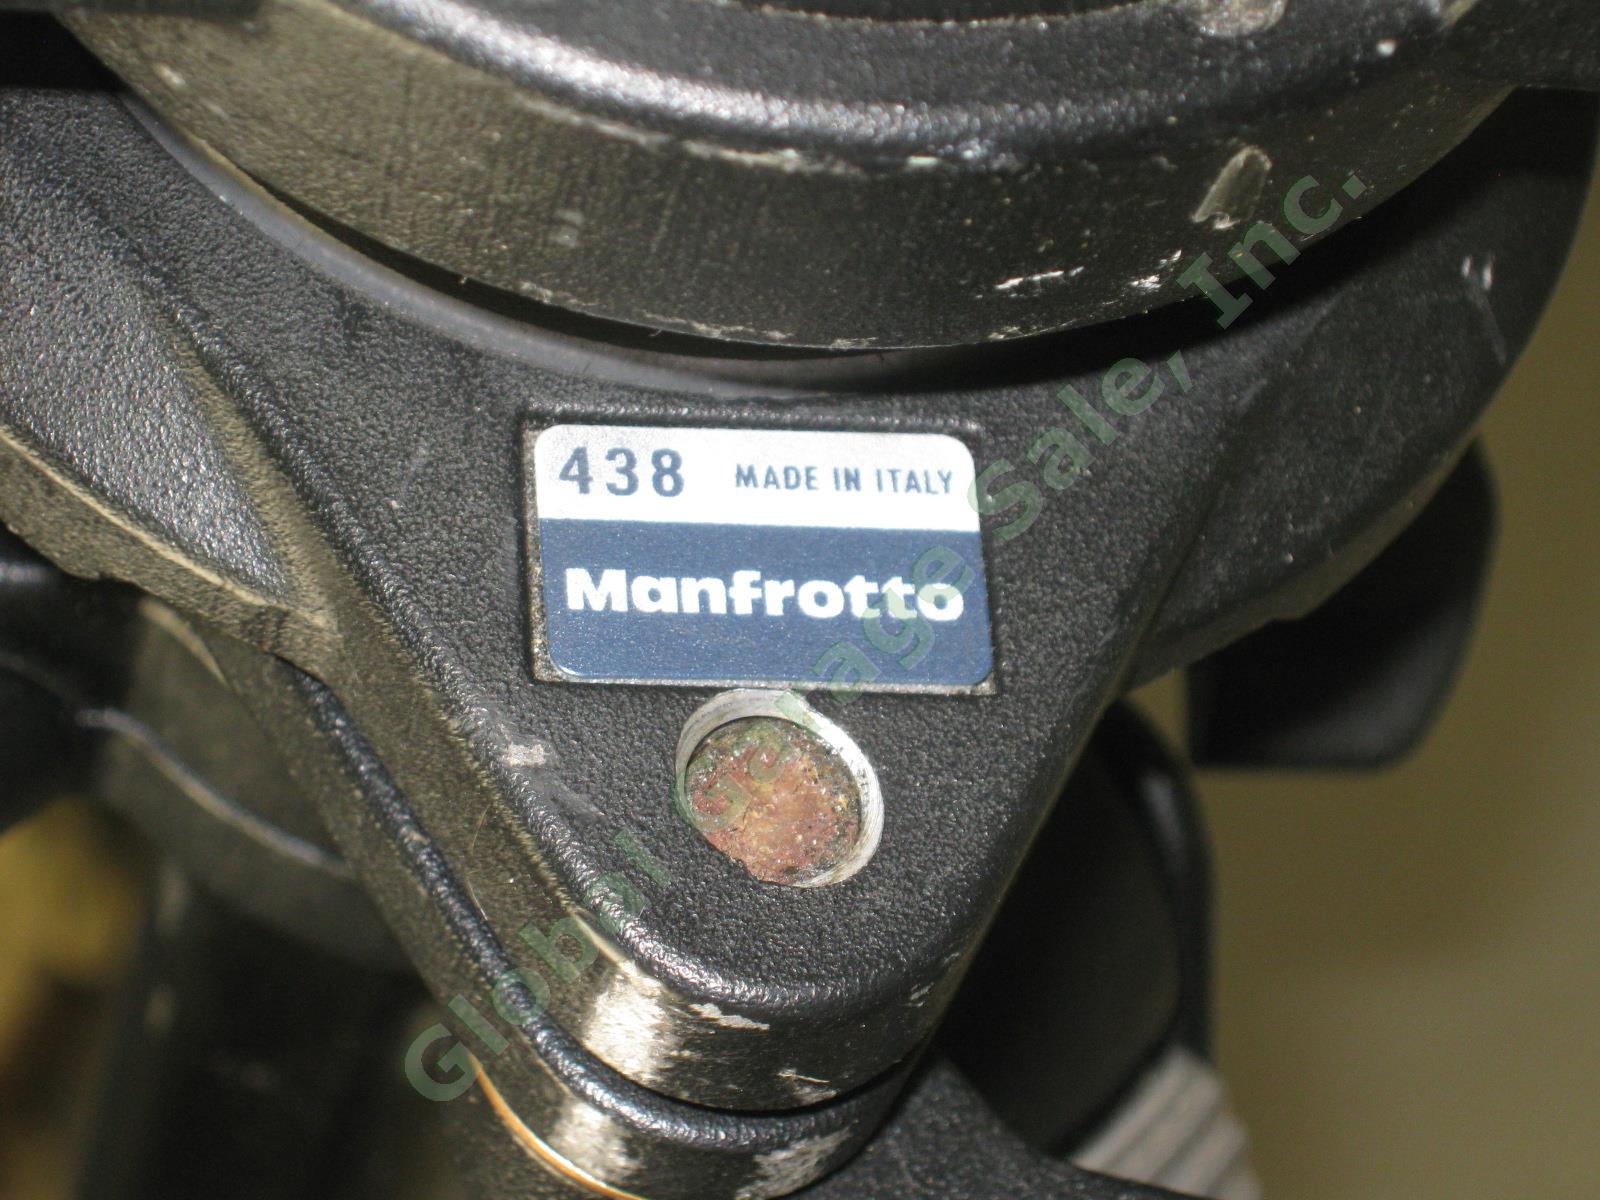 Manfrotto 3433 501 Head 3221WN 3-Stage Leg Tripod 438 Leveling Head +Mount Plate 4